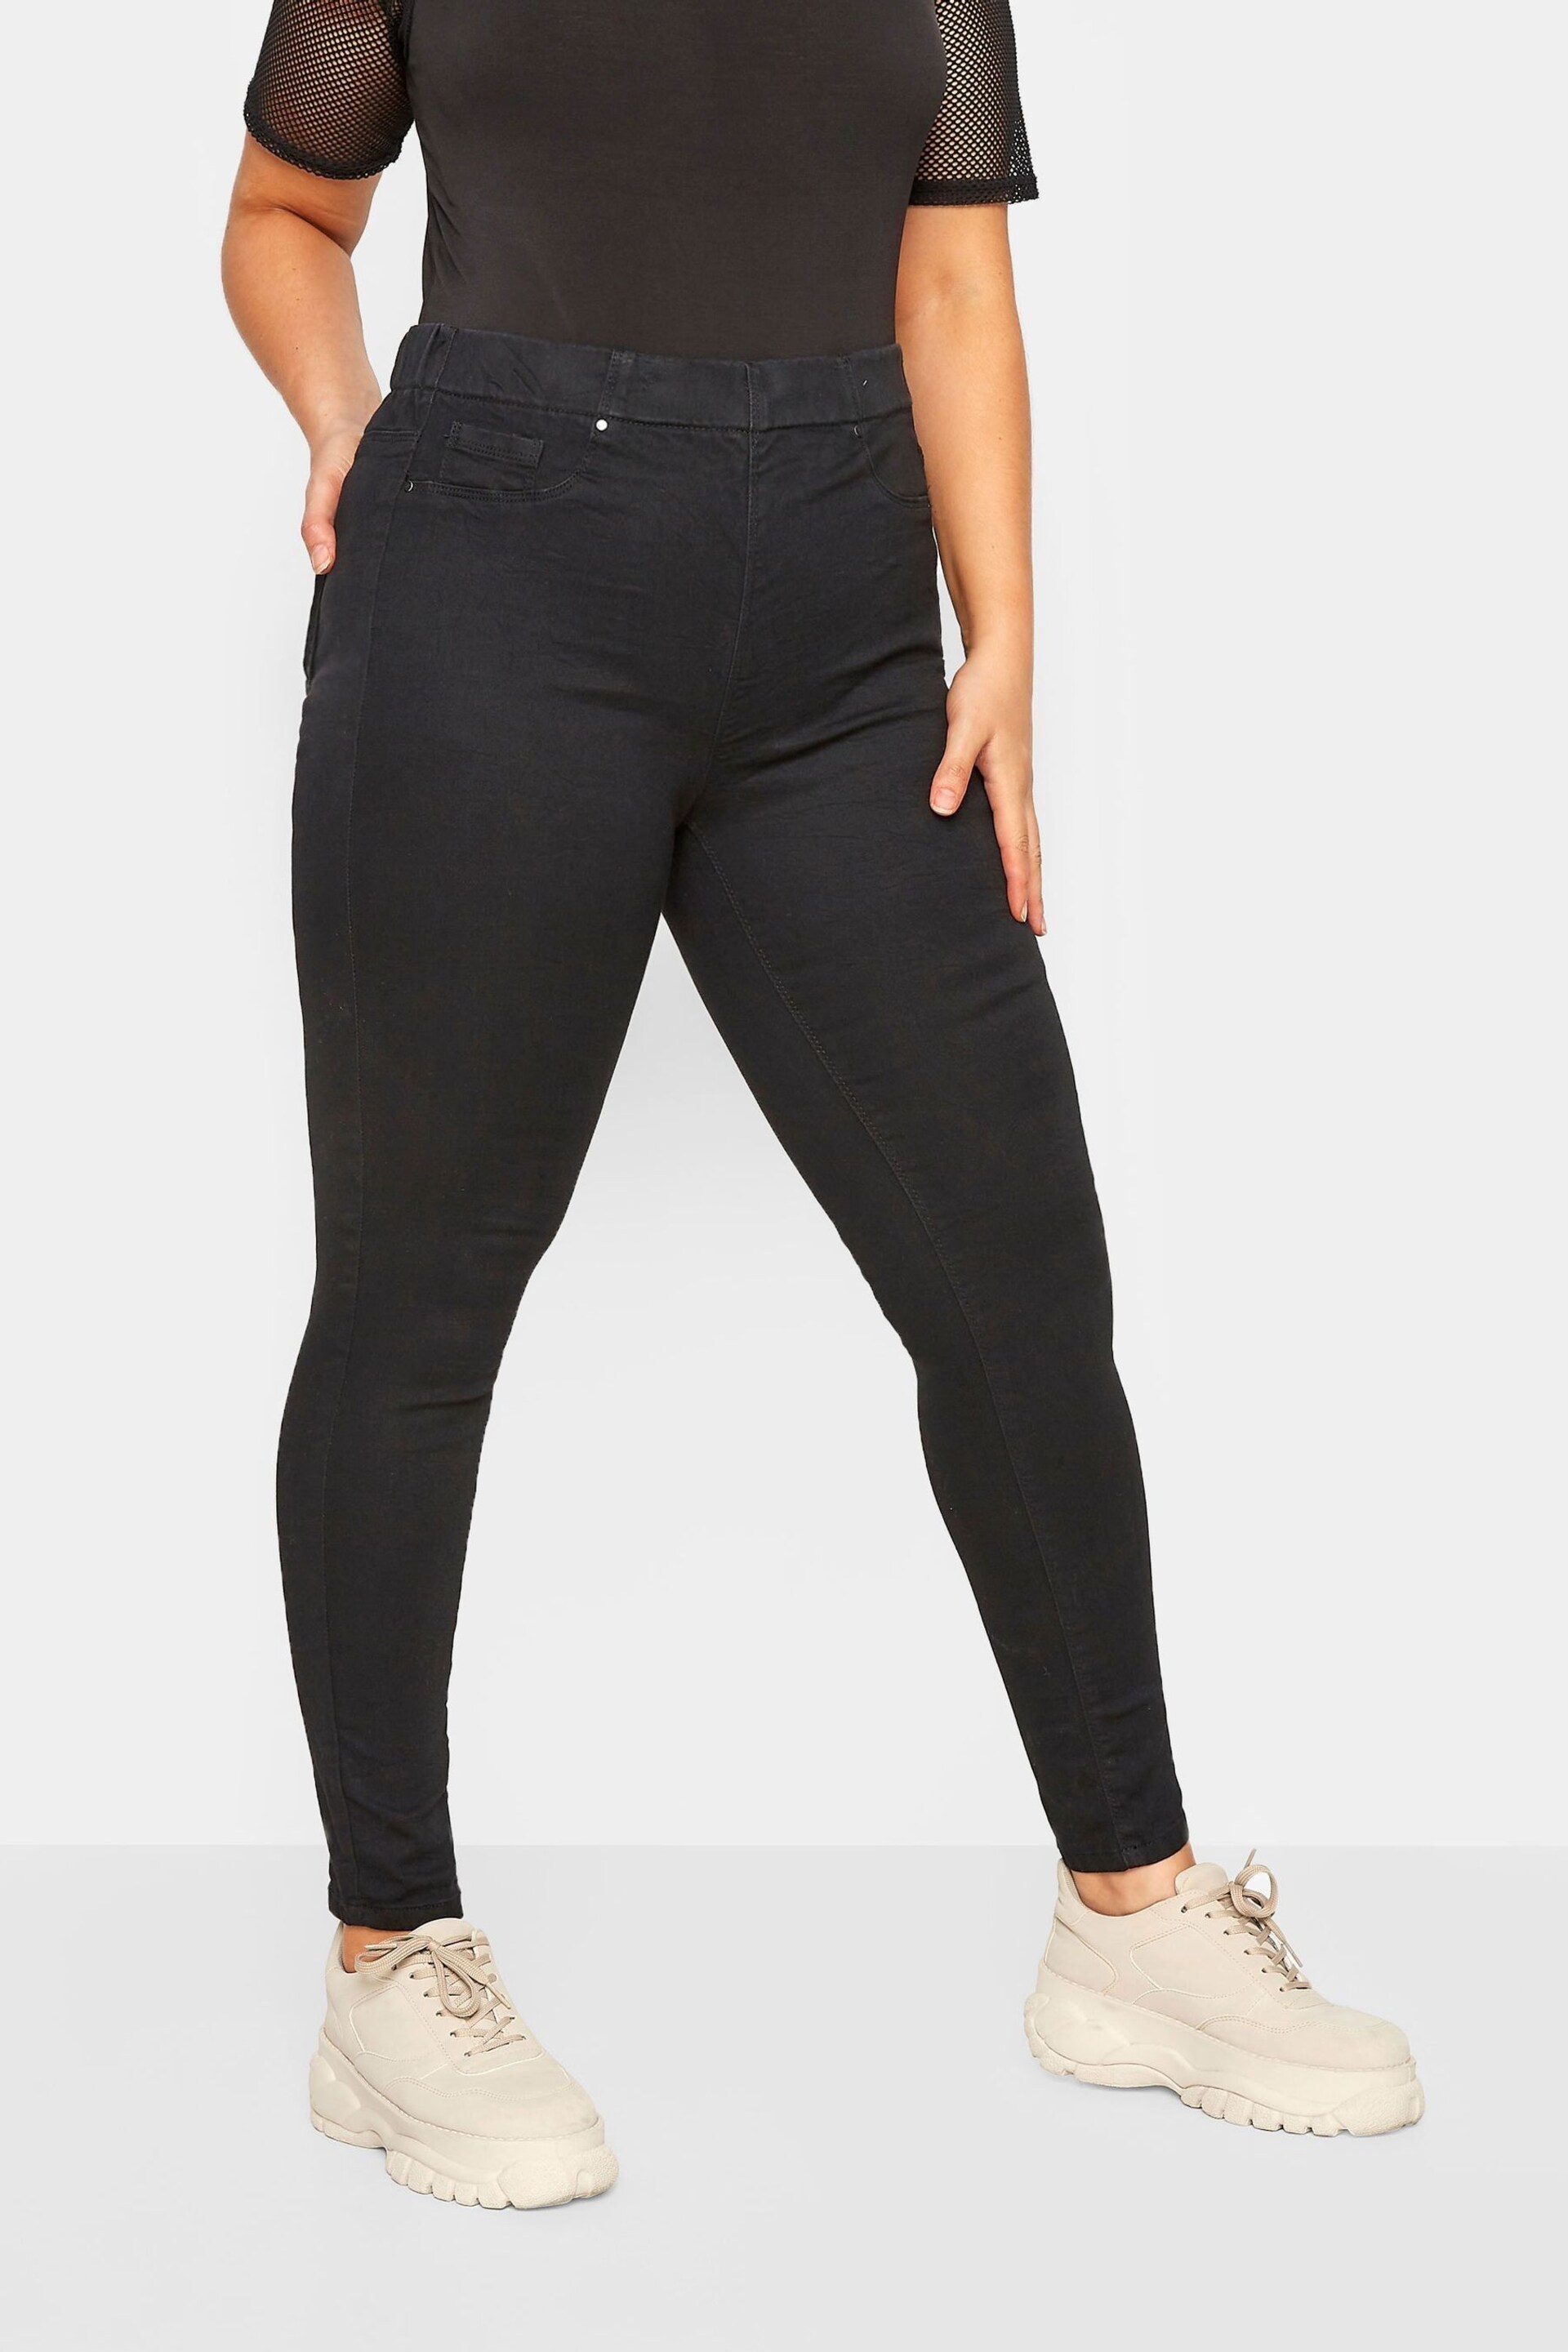 Yours Curve Black Stretch Pull On Jenny Jeggings - Image 1 of 5